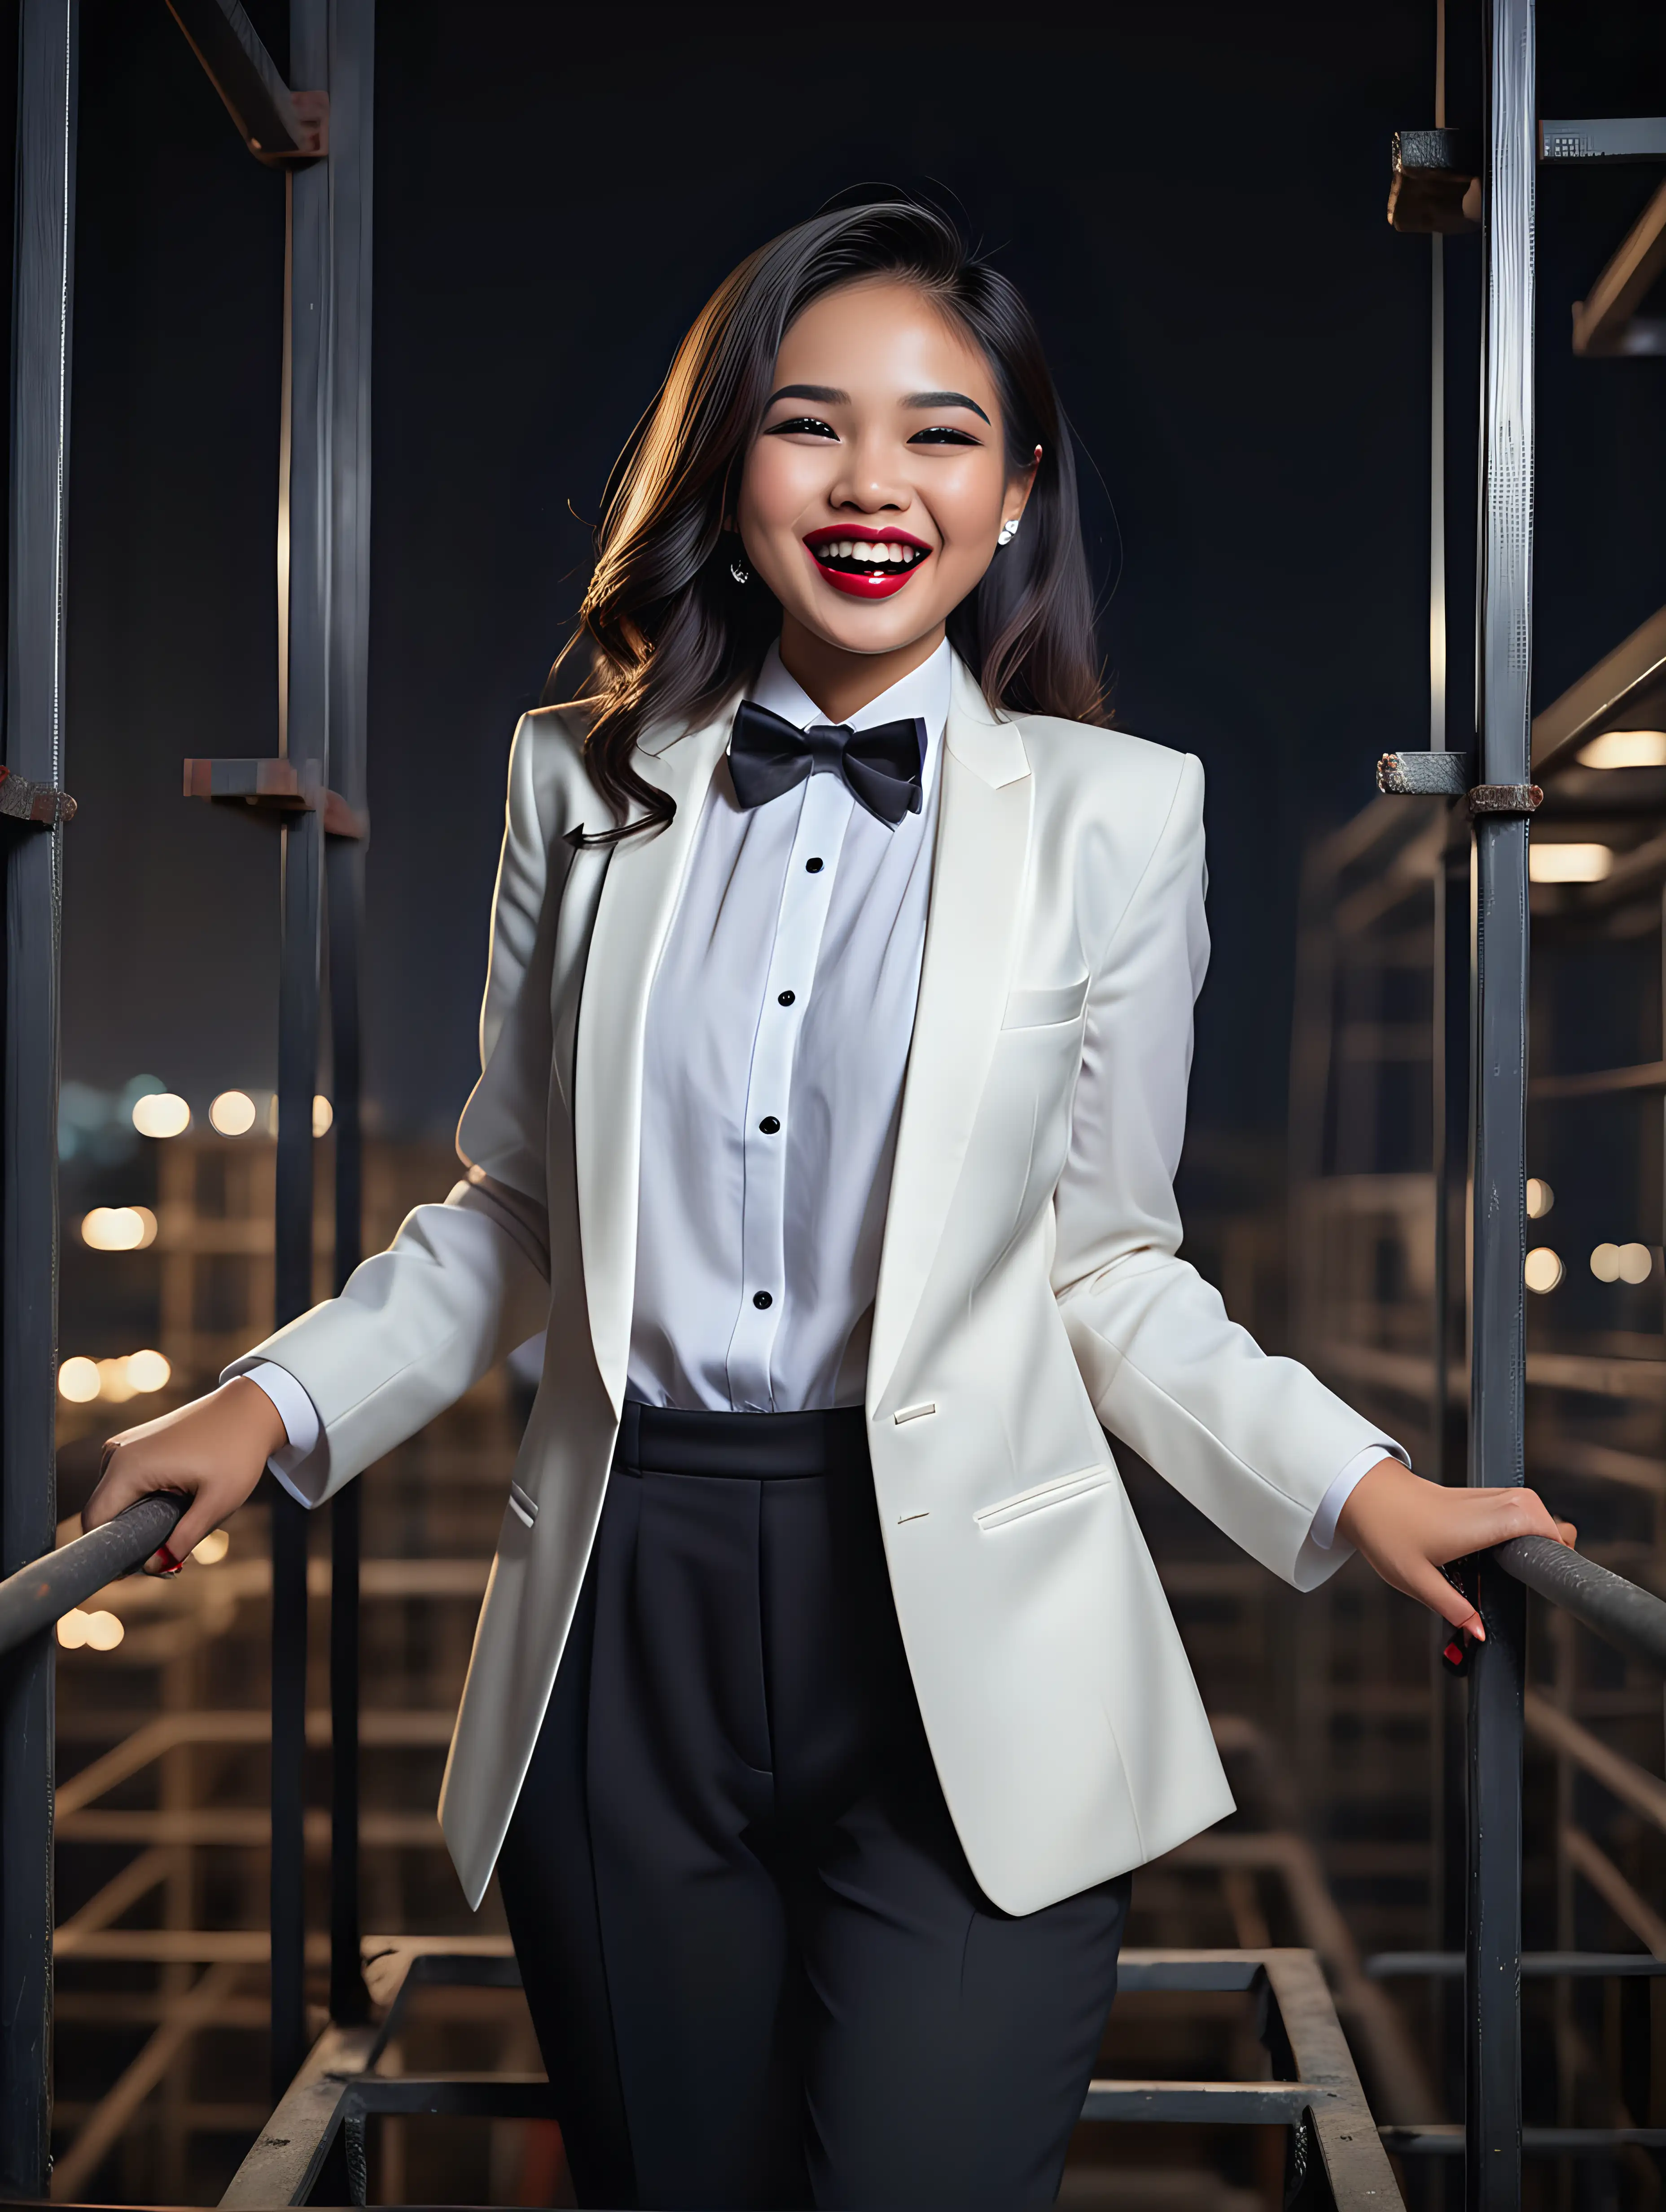 Sophisticated-Indonesian-Woman-Laughing-on-Night-Scaffold